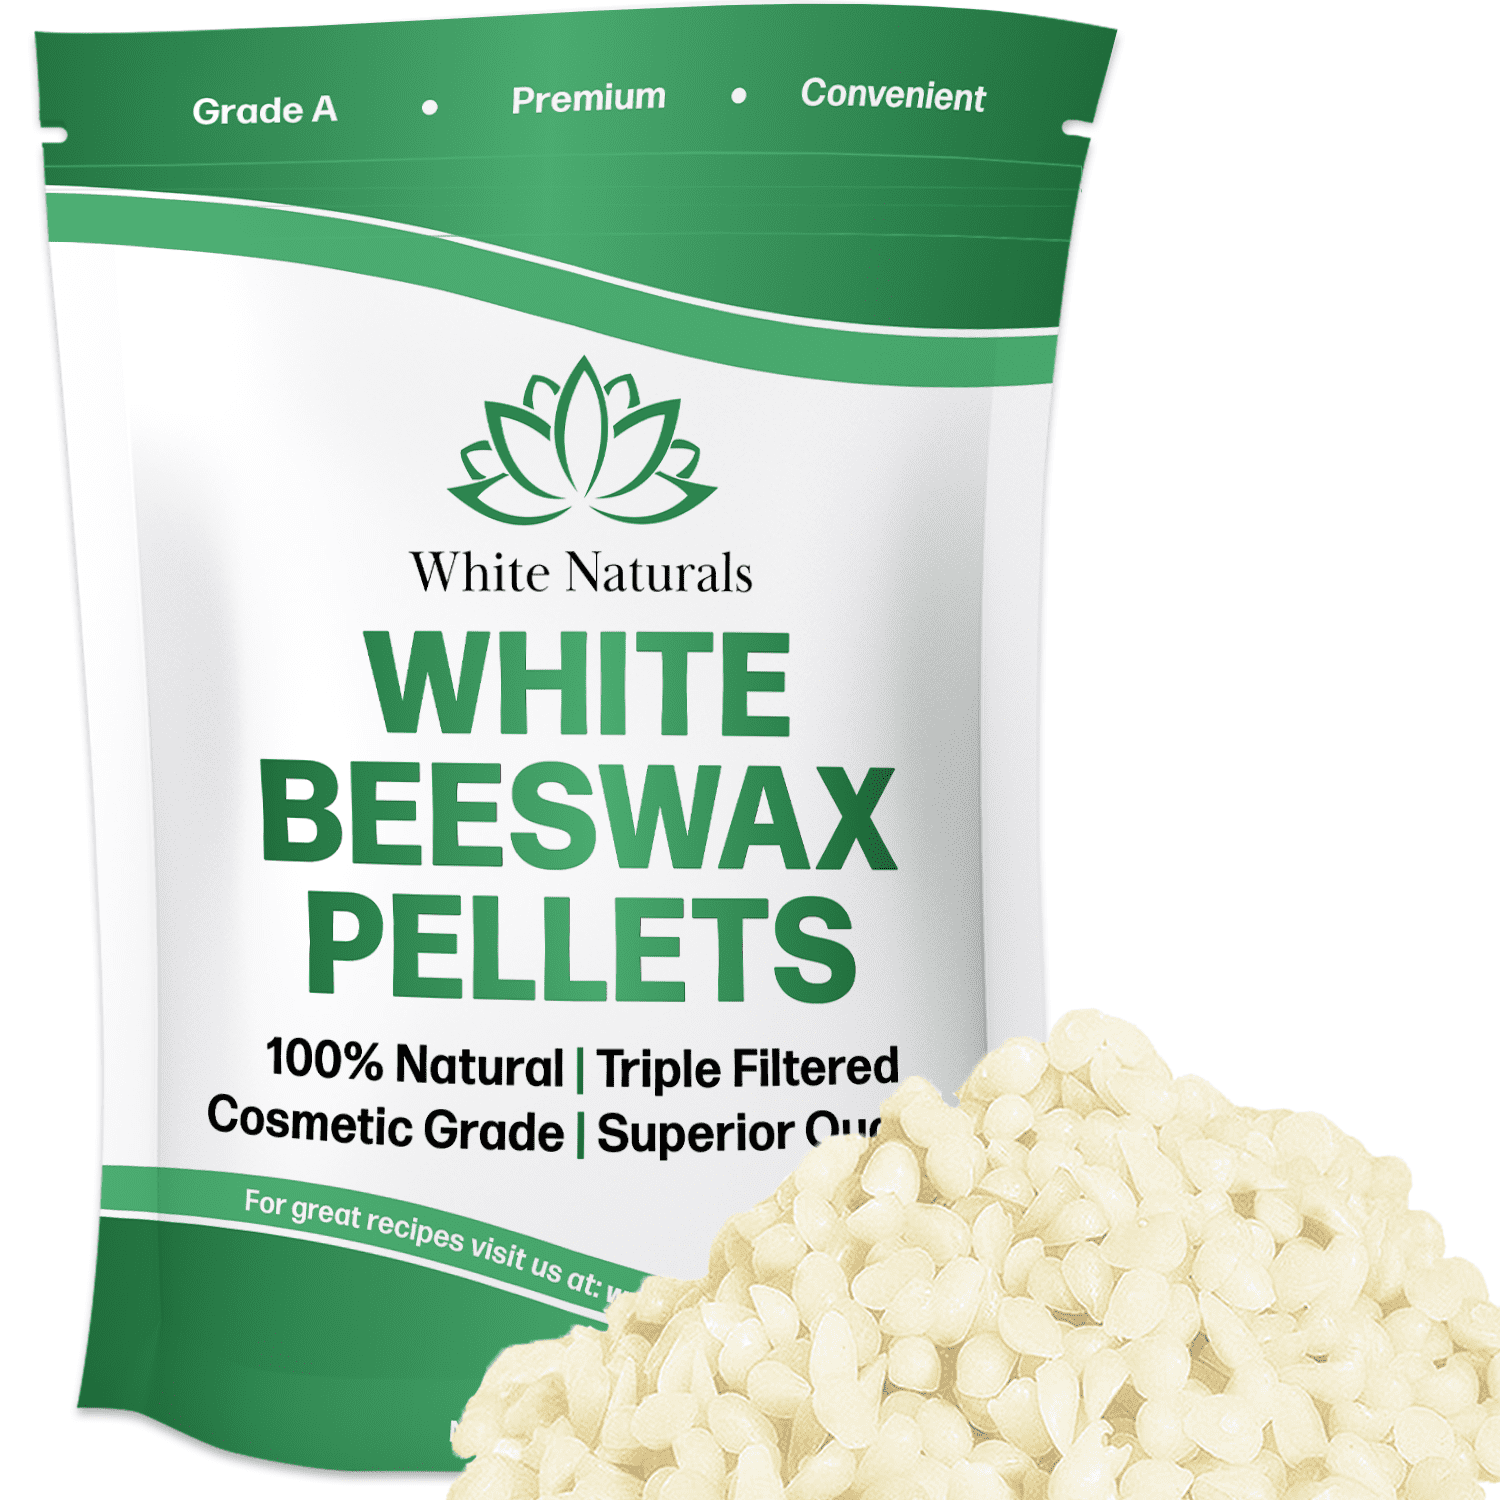 12 Oz WHITE BEESWAX Bees WAX Organic Pastilles Beads Premium Prime Grade A  100% Pure 